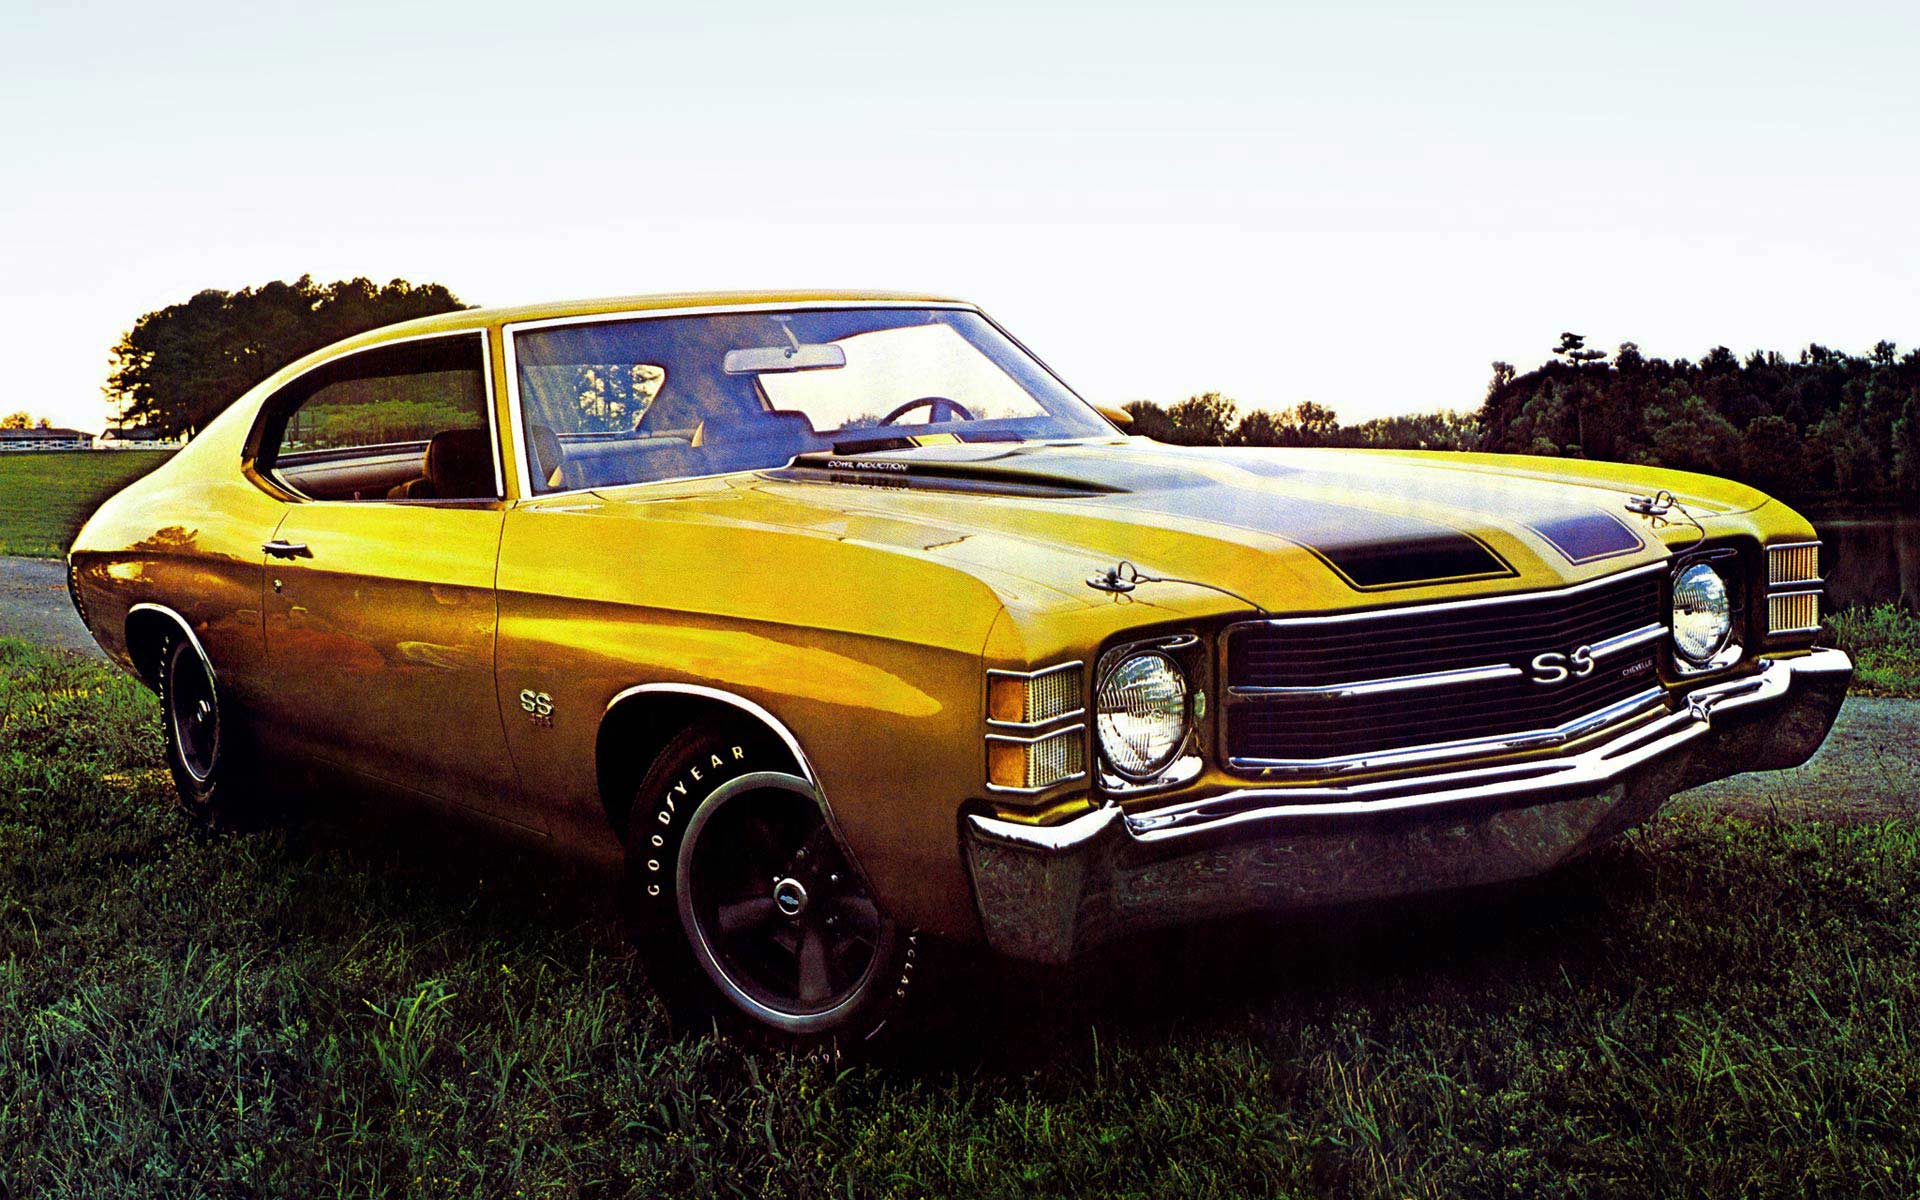 Chevy Chevelle Wallpapers.